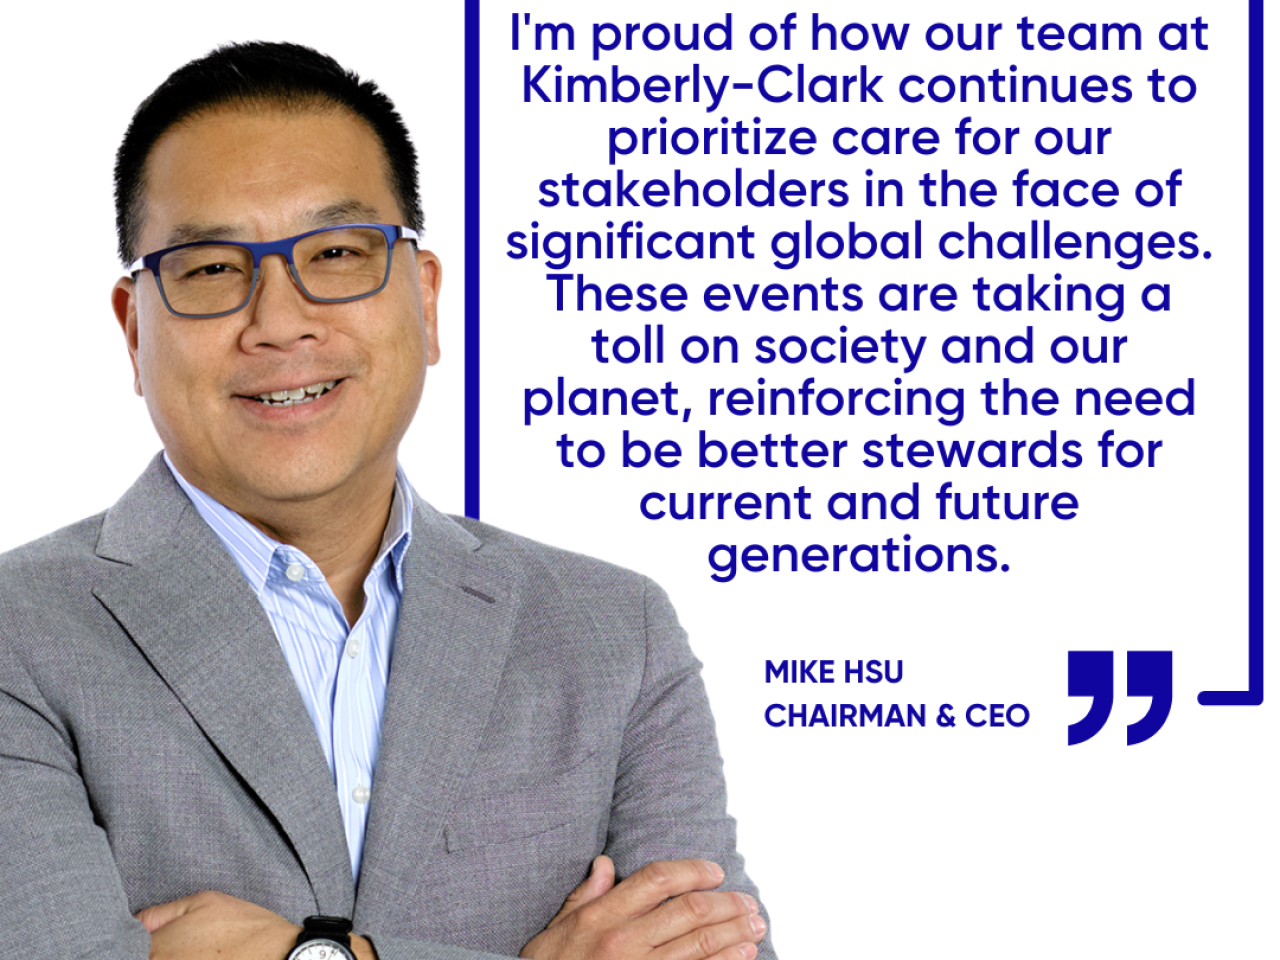 Quote from Mike Hsu, Kimberly-Clark Chairman & CEO